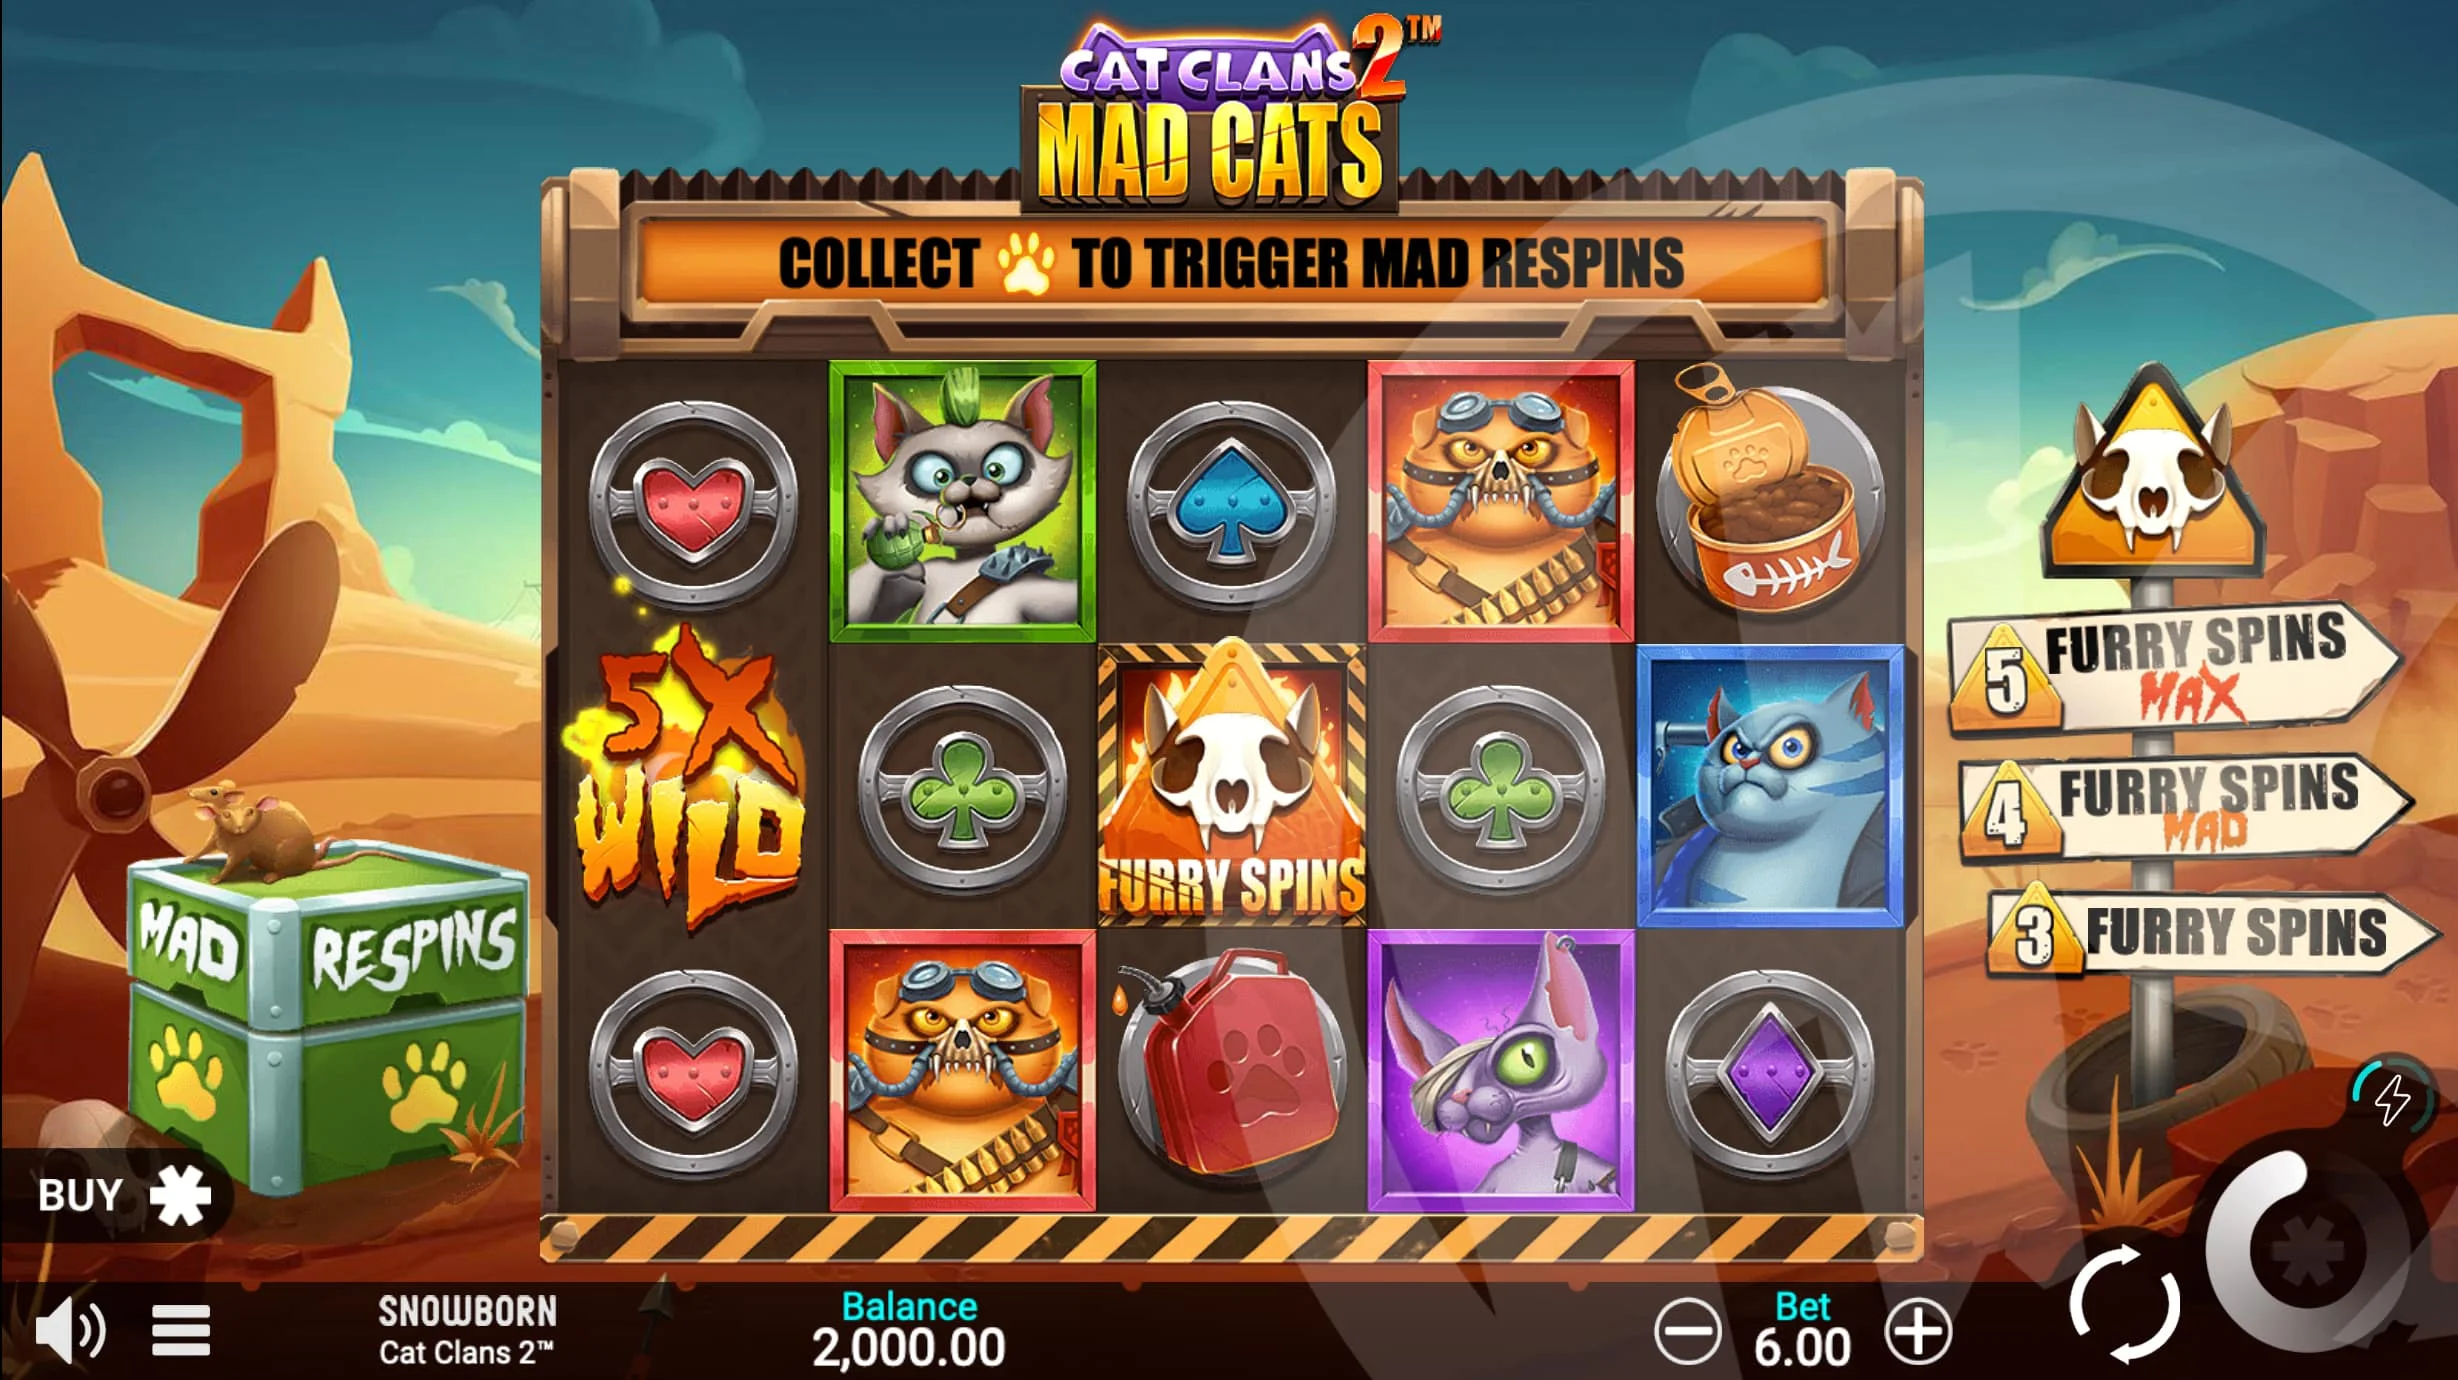 Cat Clans 2 Mad Cats Base Game